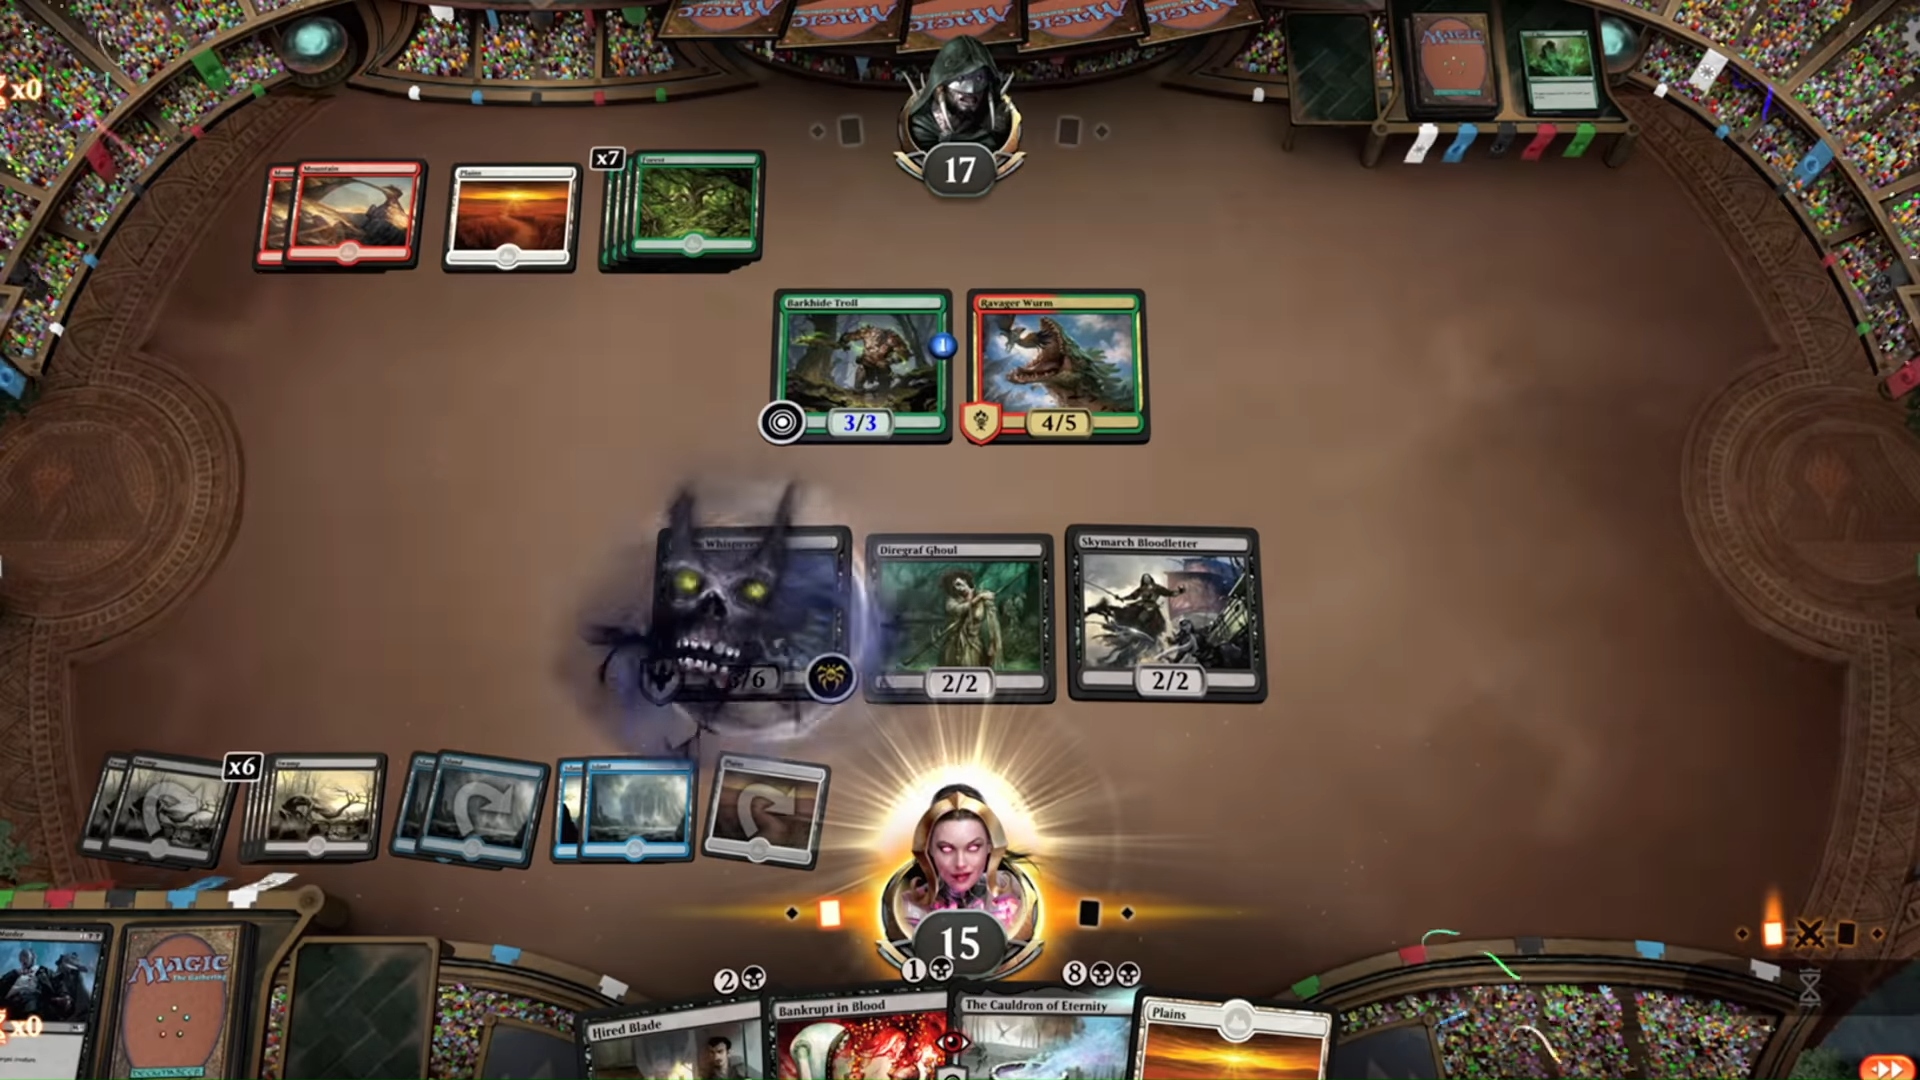 Addictive games: Magic: The Gathering Arena. Screenshot shows a game in progress, with cards laid out on the table.